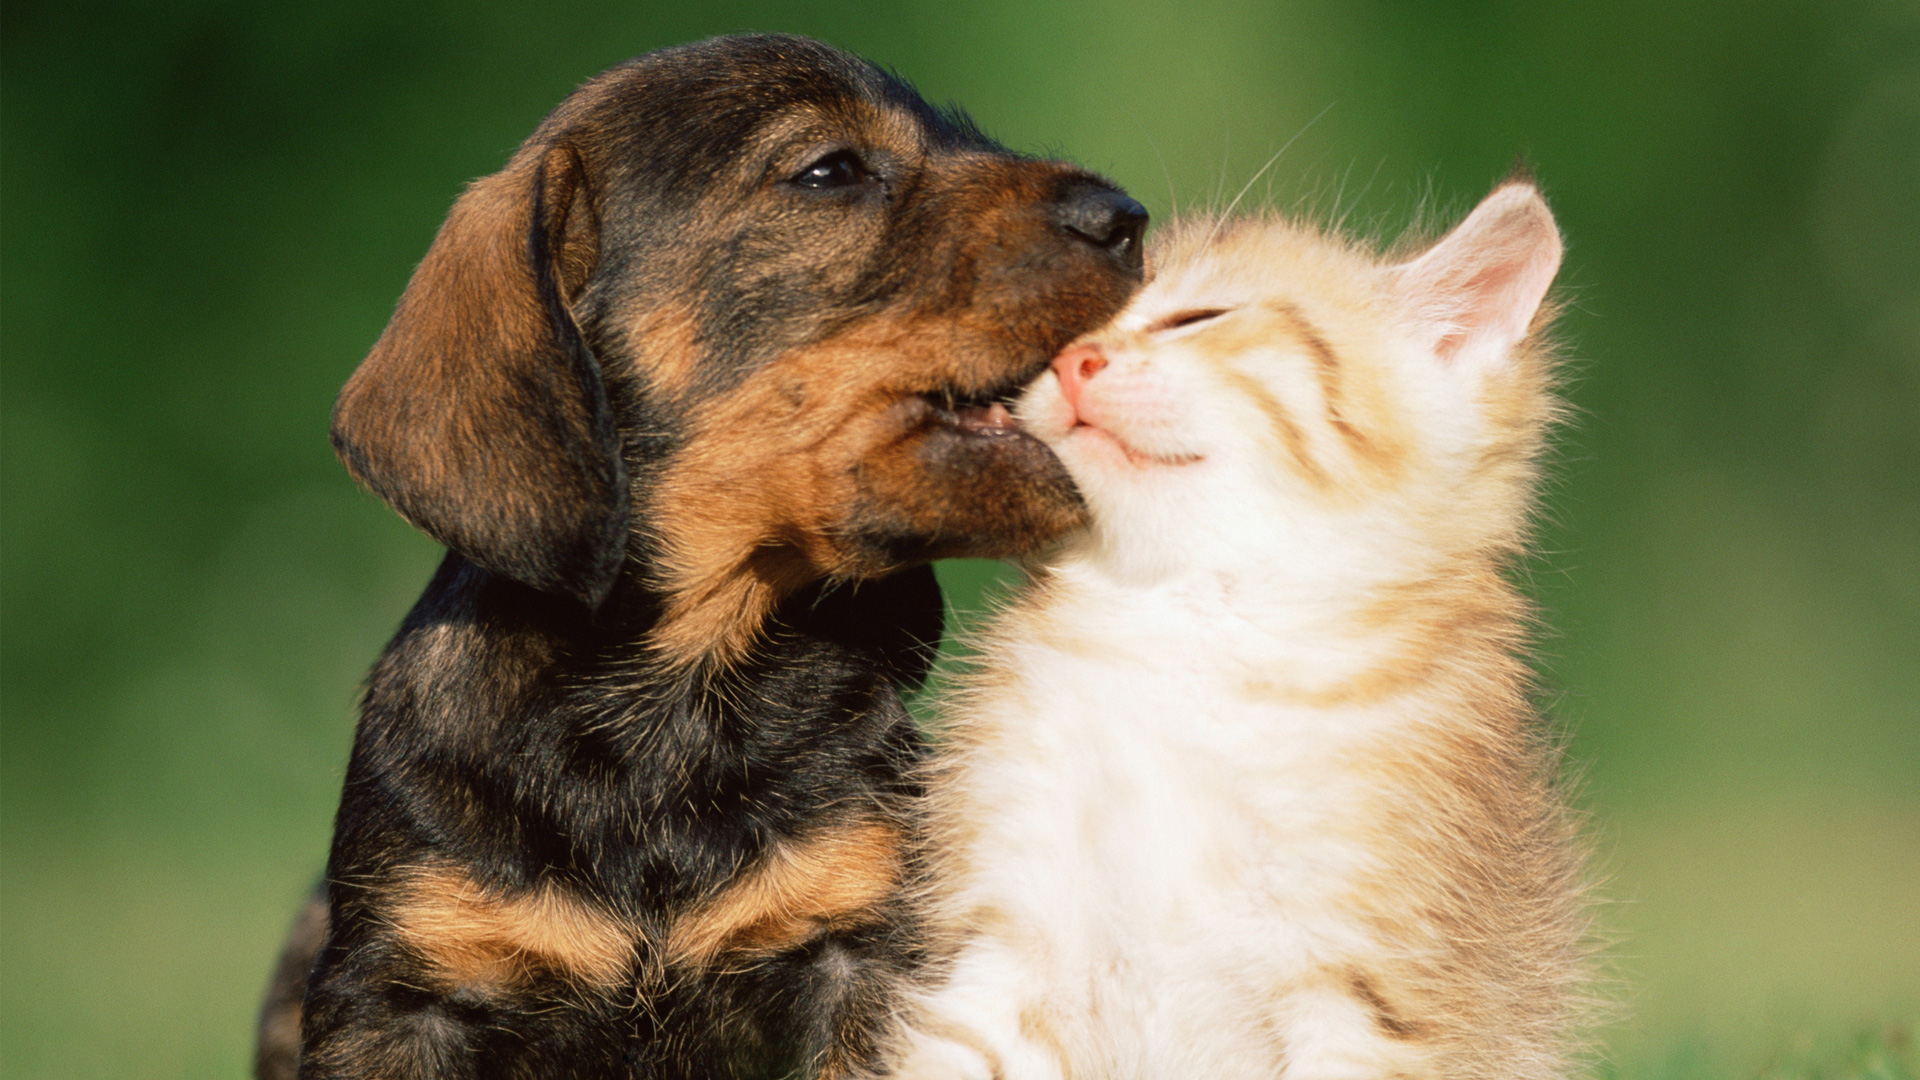 Puppies vs. kittens: Who will win the cute contest?